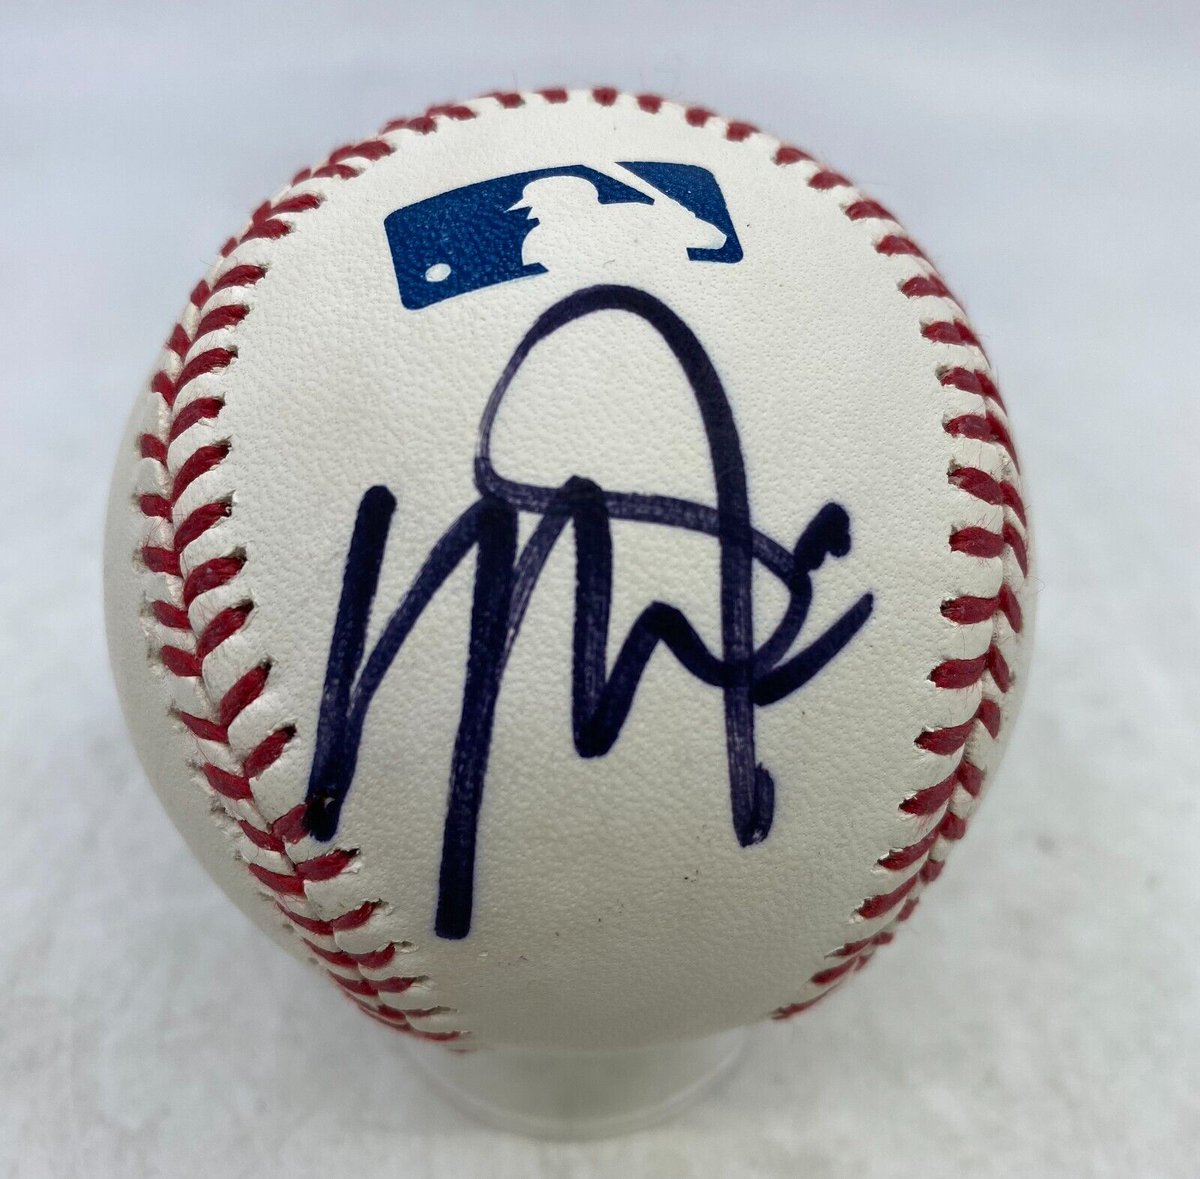 Mike Trout Signed OML Baseball 🔥 101 bids! 🚀 Congrats to the lucky winner! #MikeTrout #Angels #SignedMemorabilia